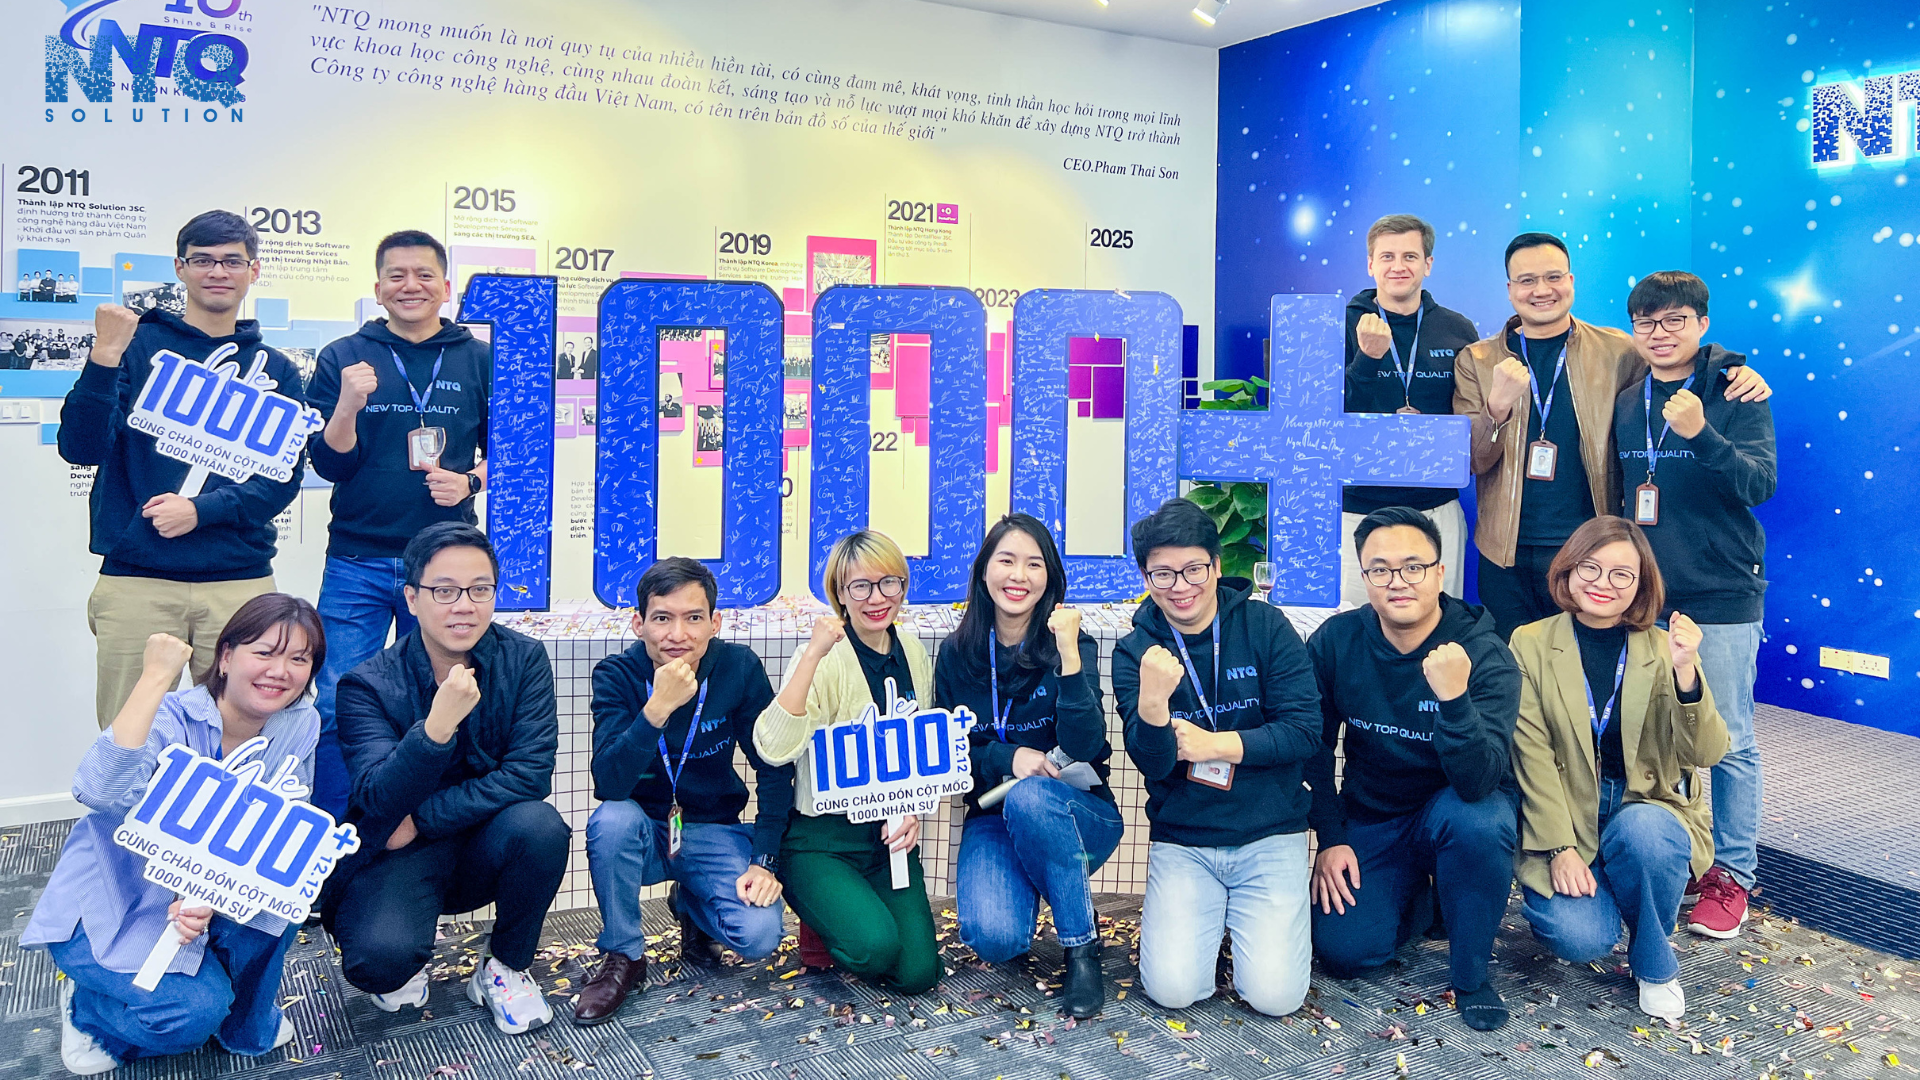 NTQ Solution reached the milestone of 1000 employees